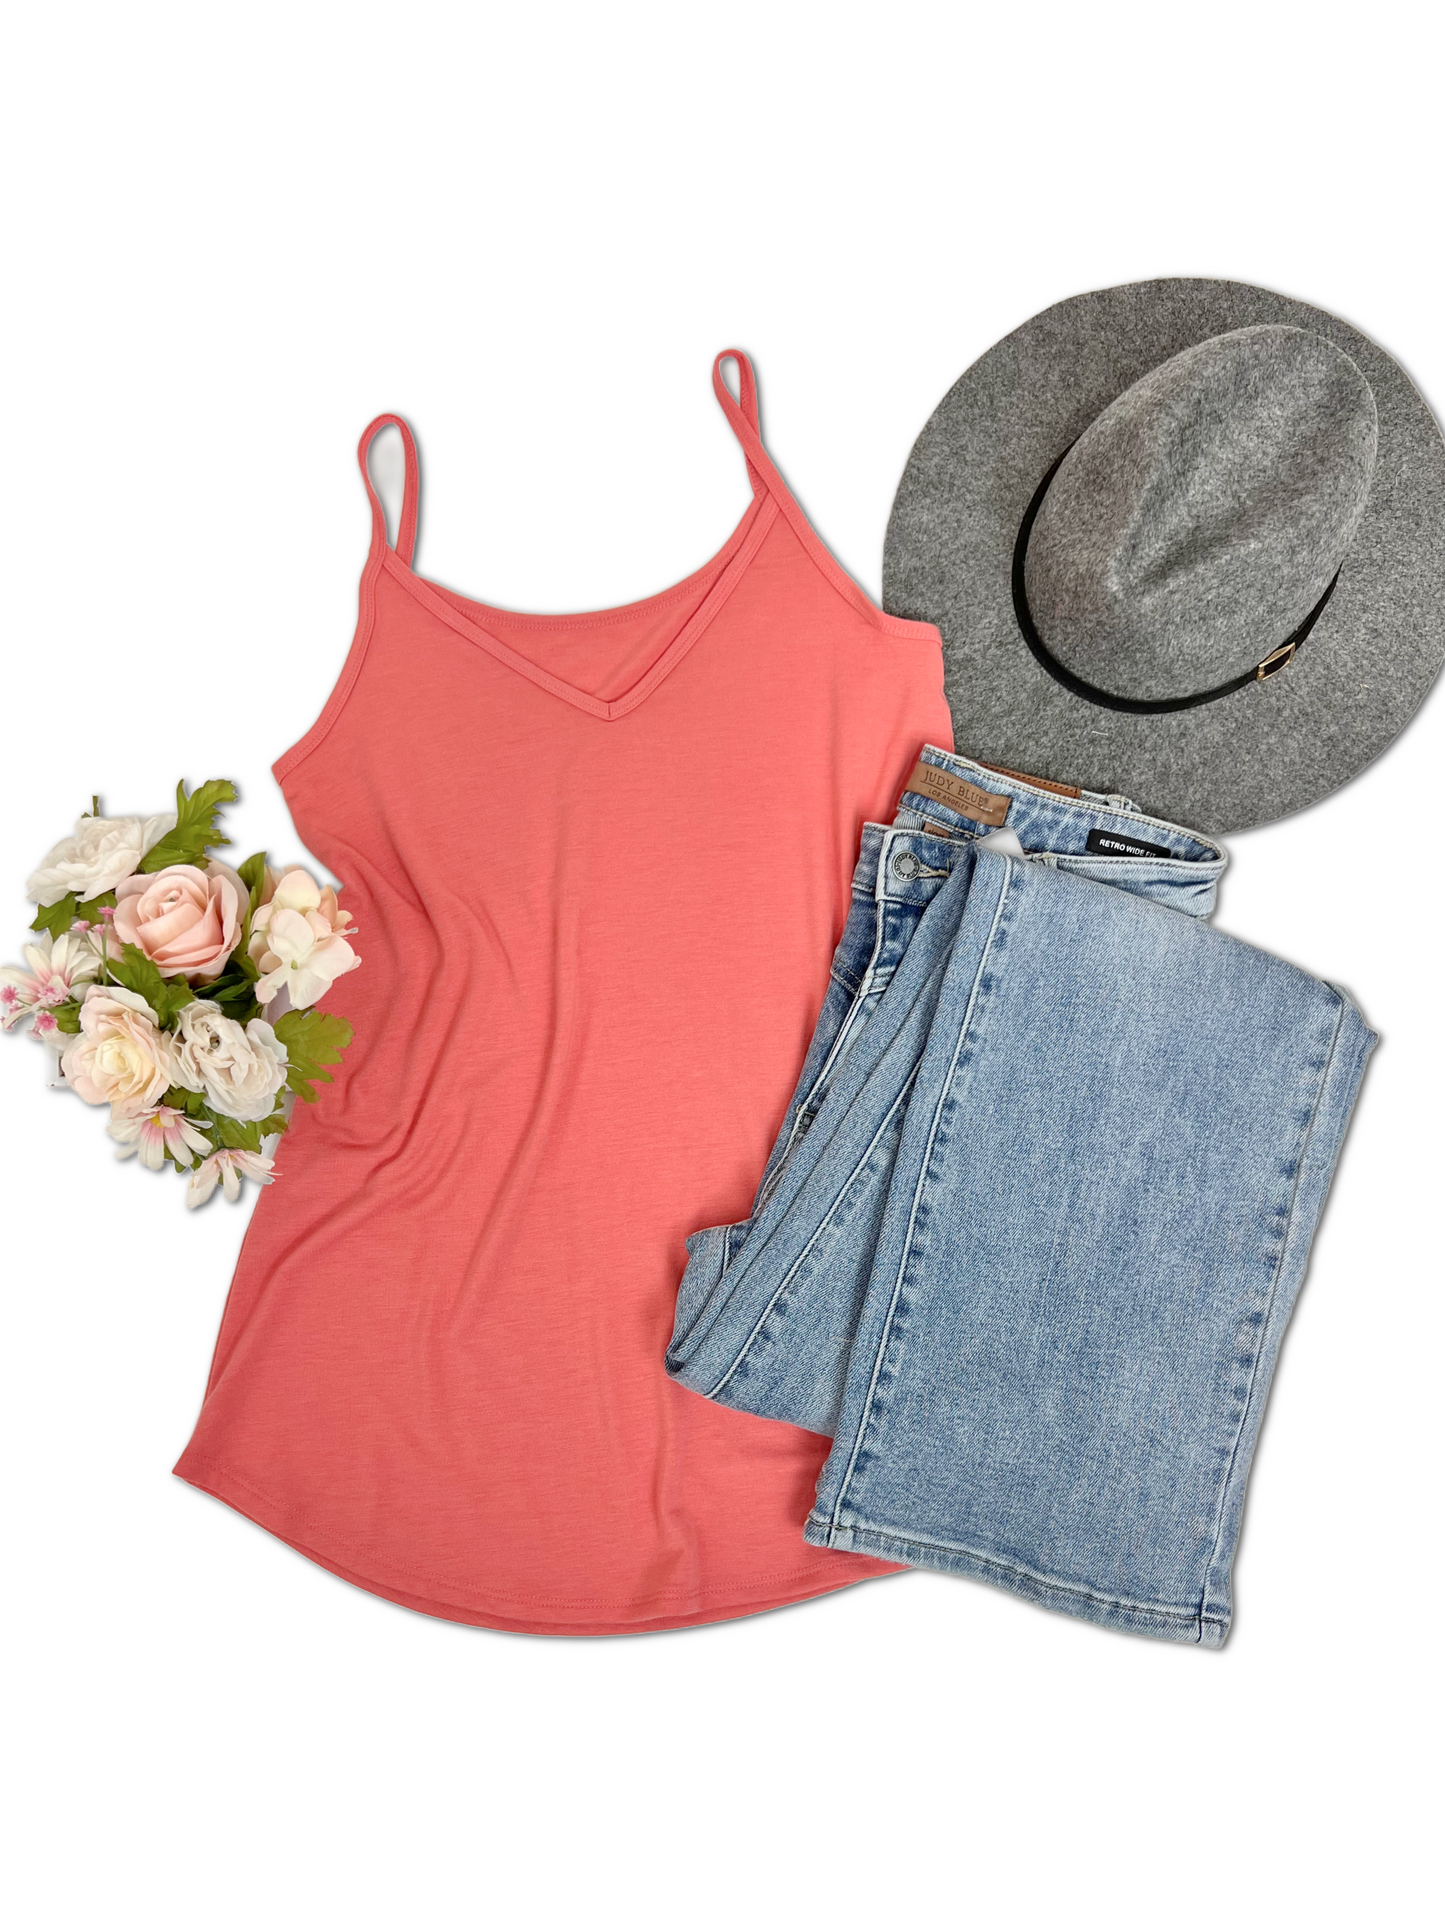 Amber - Reversible Tank in Coral